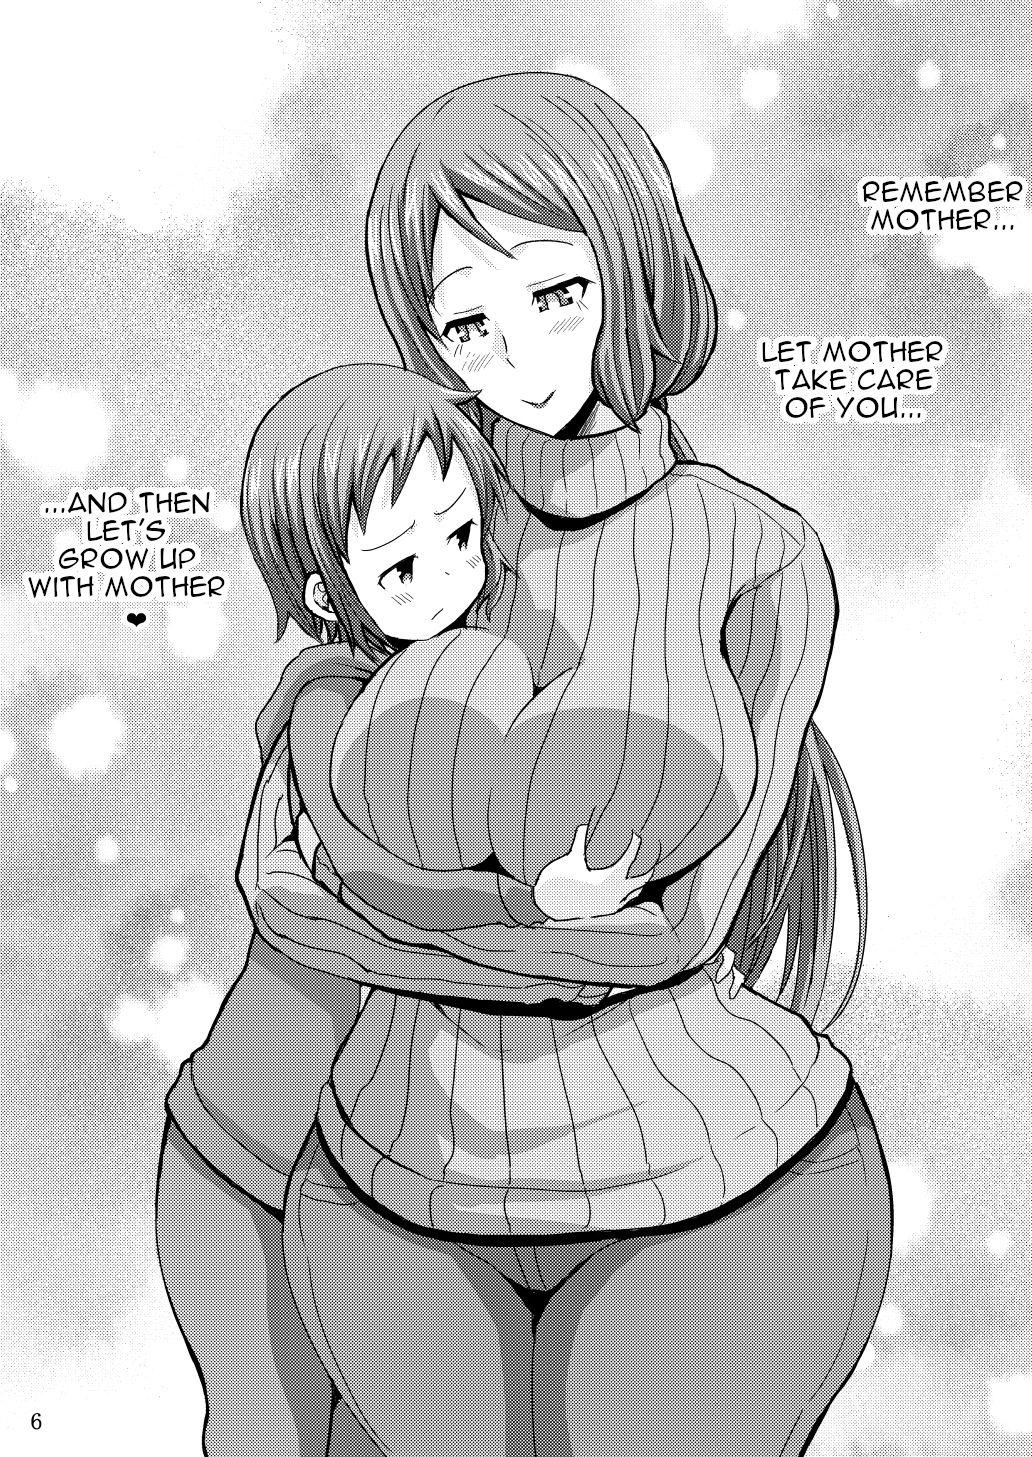 Oldvsyoung Okaa-san to Hagukumimasho | Let's grow up with mother - Gundam build fighters Footfetish - Page 5